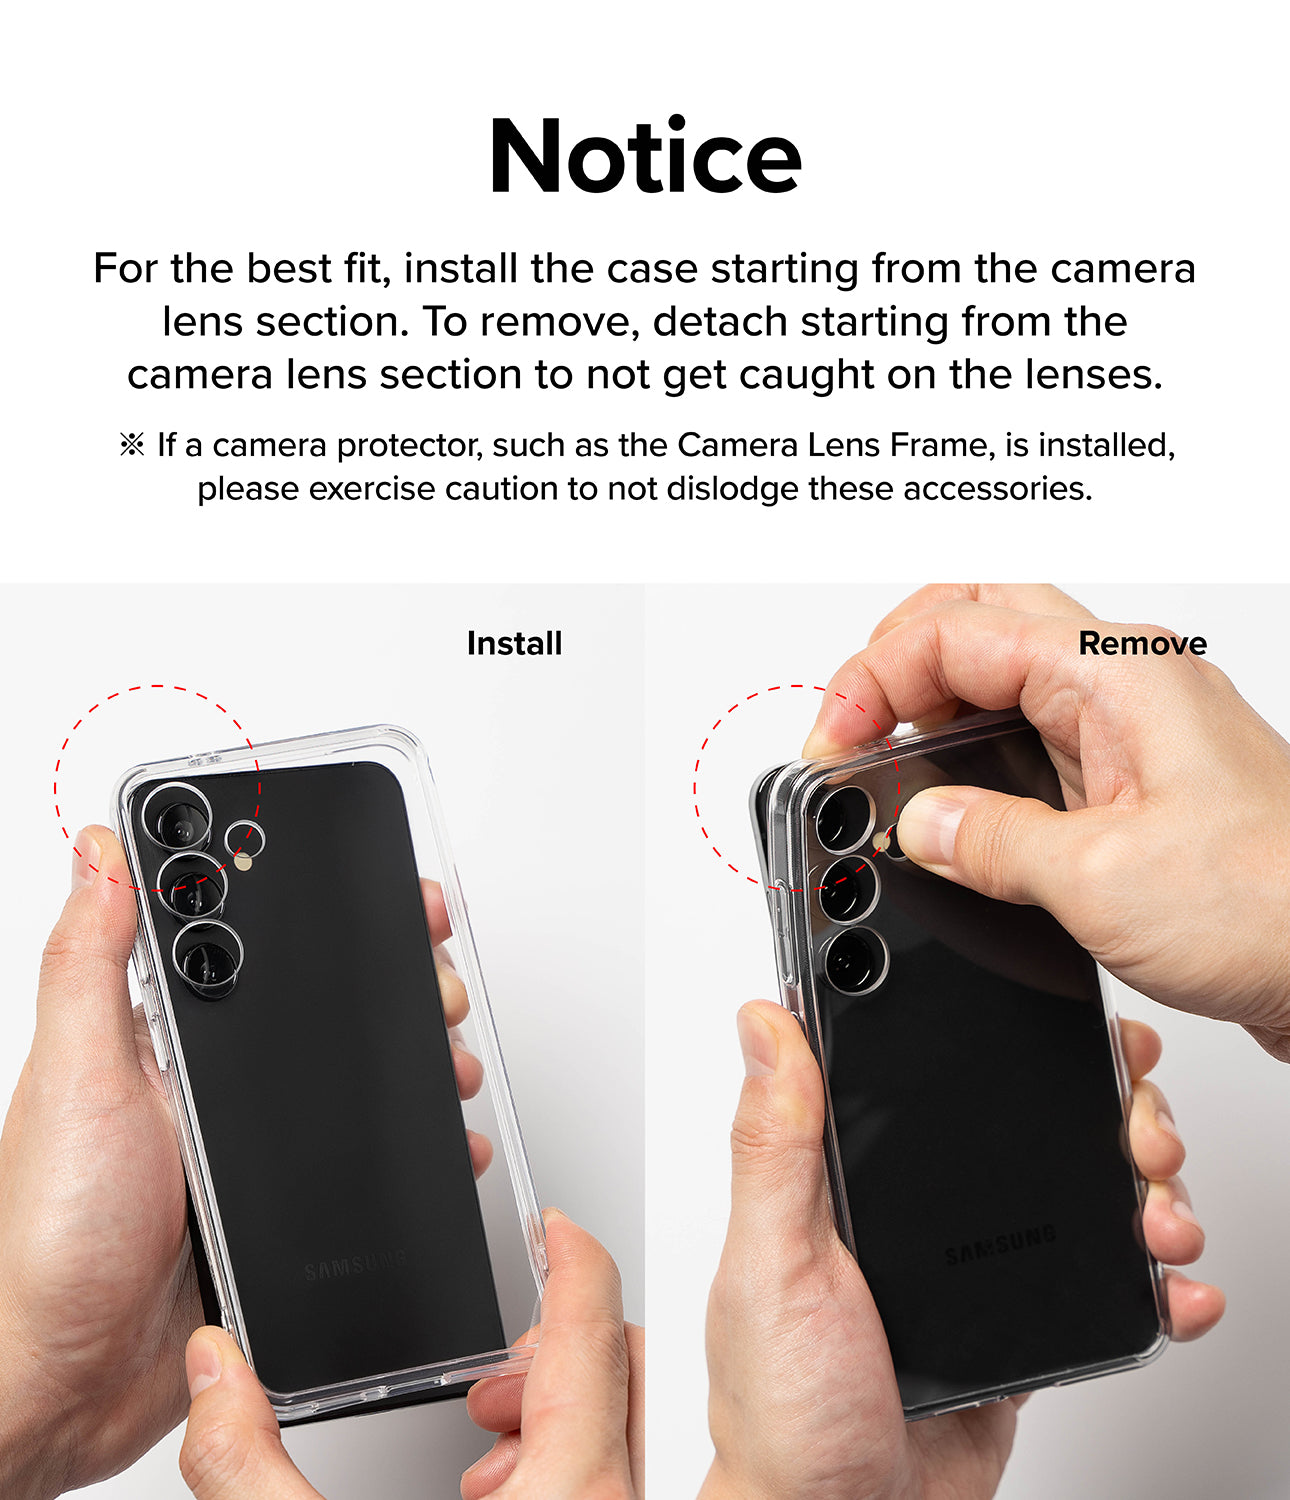 Galaxy S24 Plus Case | Fusion Magnetic - Black - Notice. For the best fit, install the case starting from the camera lens section. To remove, detach starting from the camera lens section to not get caught on the lenses.